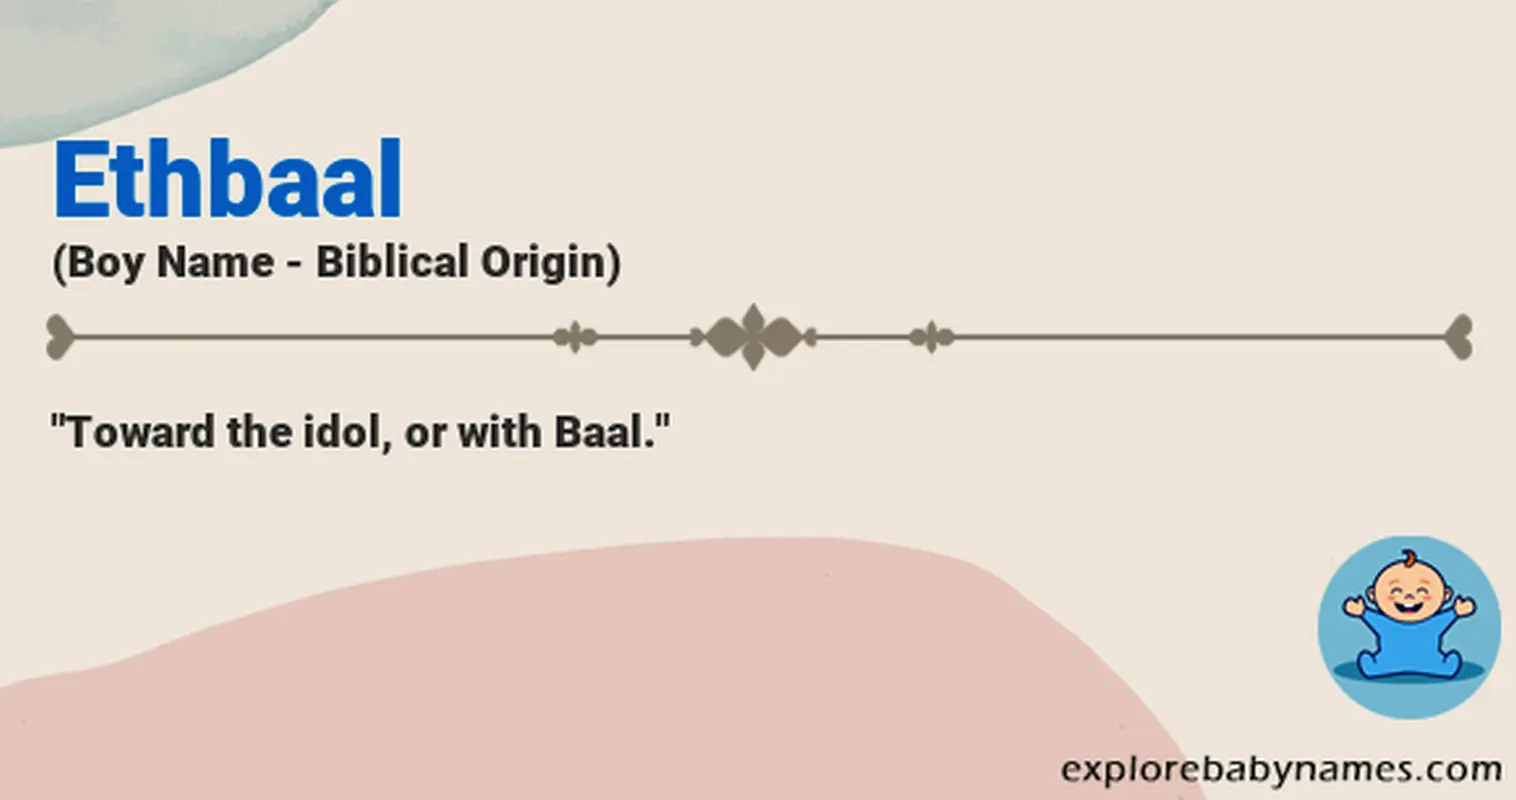 Meaning of Ethbaal